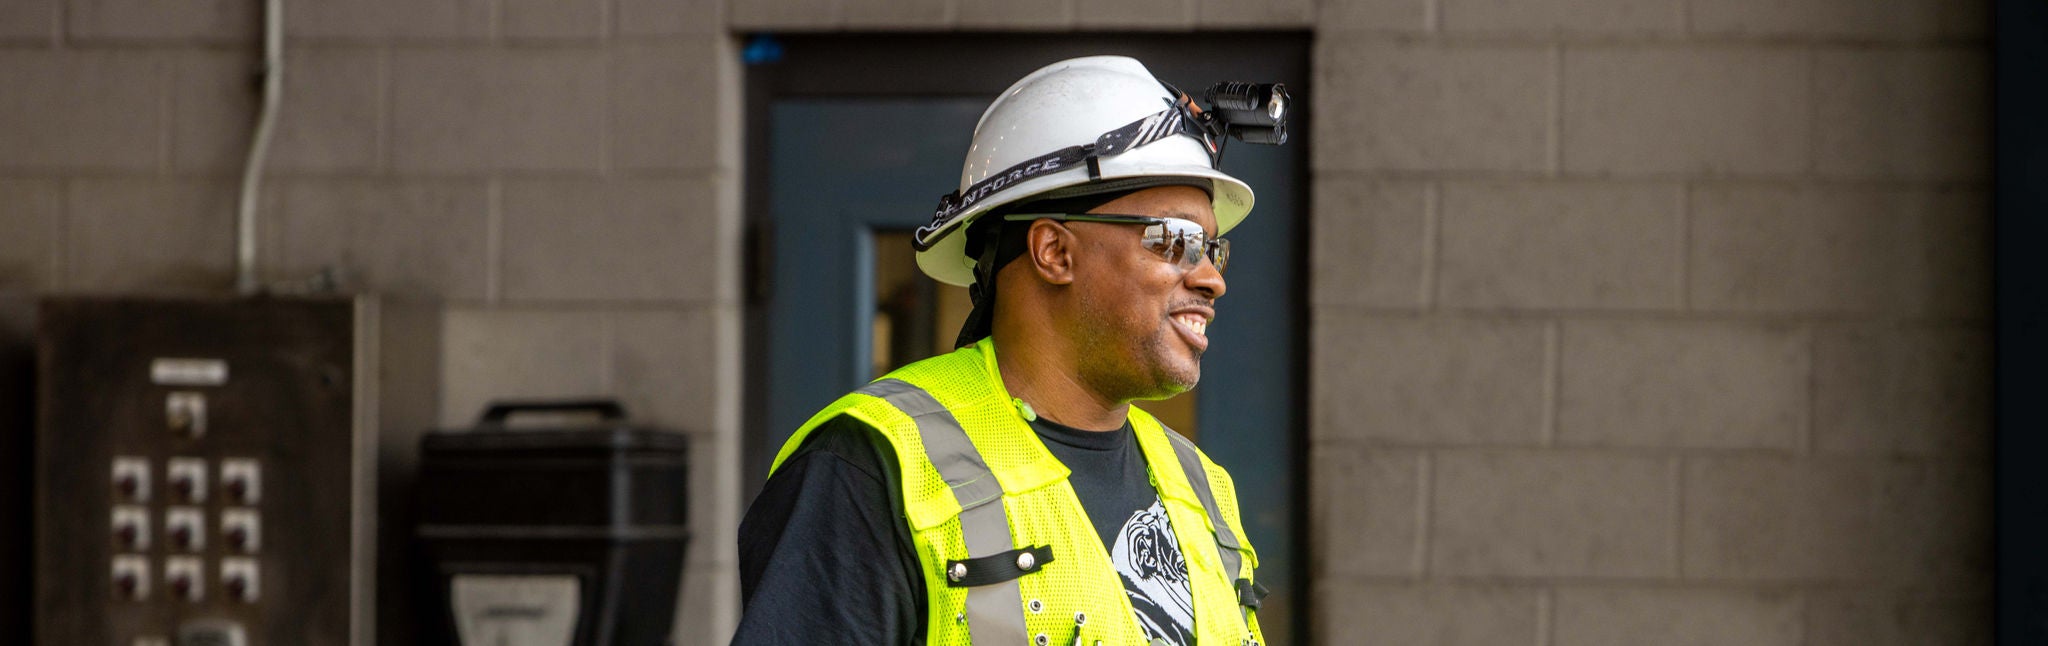 Norfolk Southern employee who uses safety technology in safety vest and hat smiling